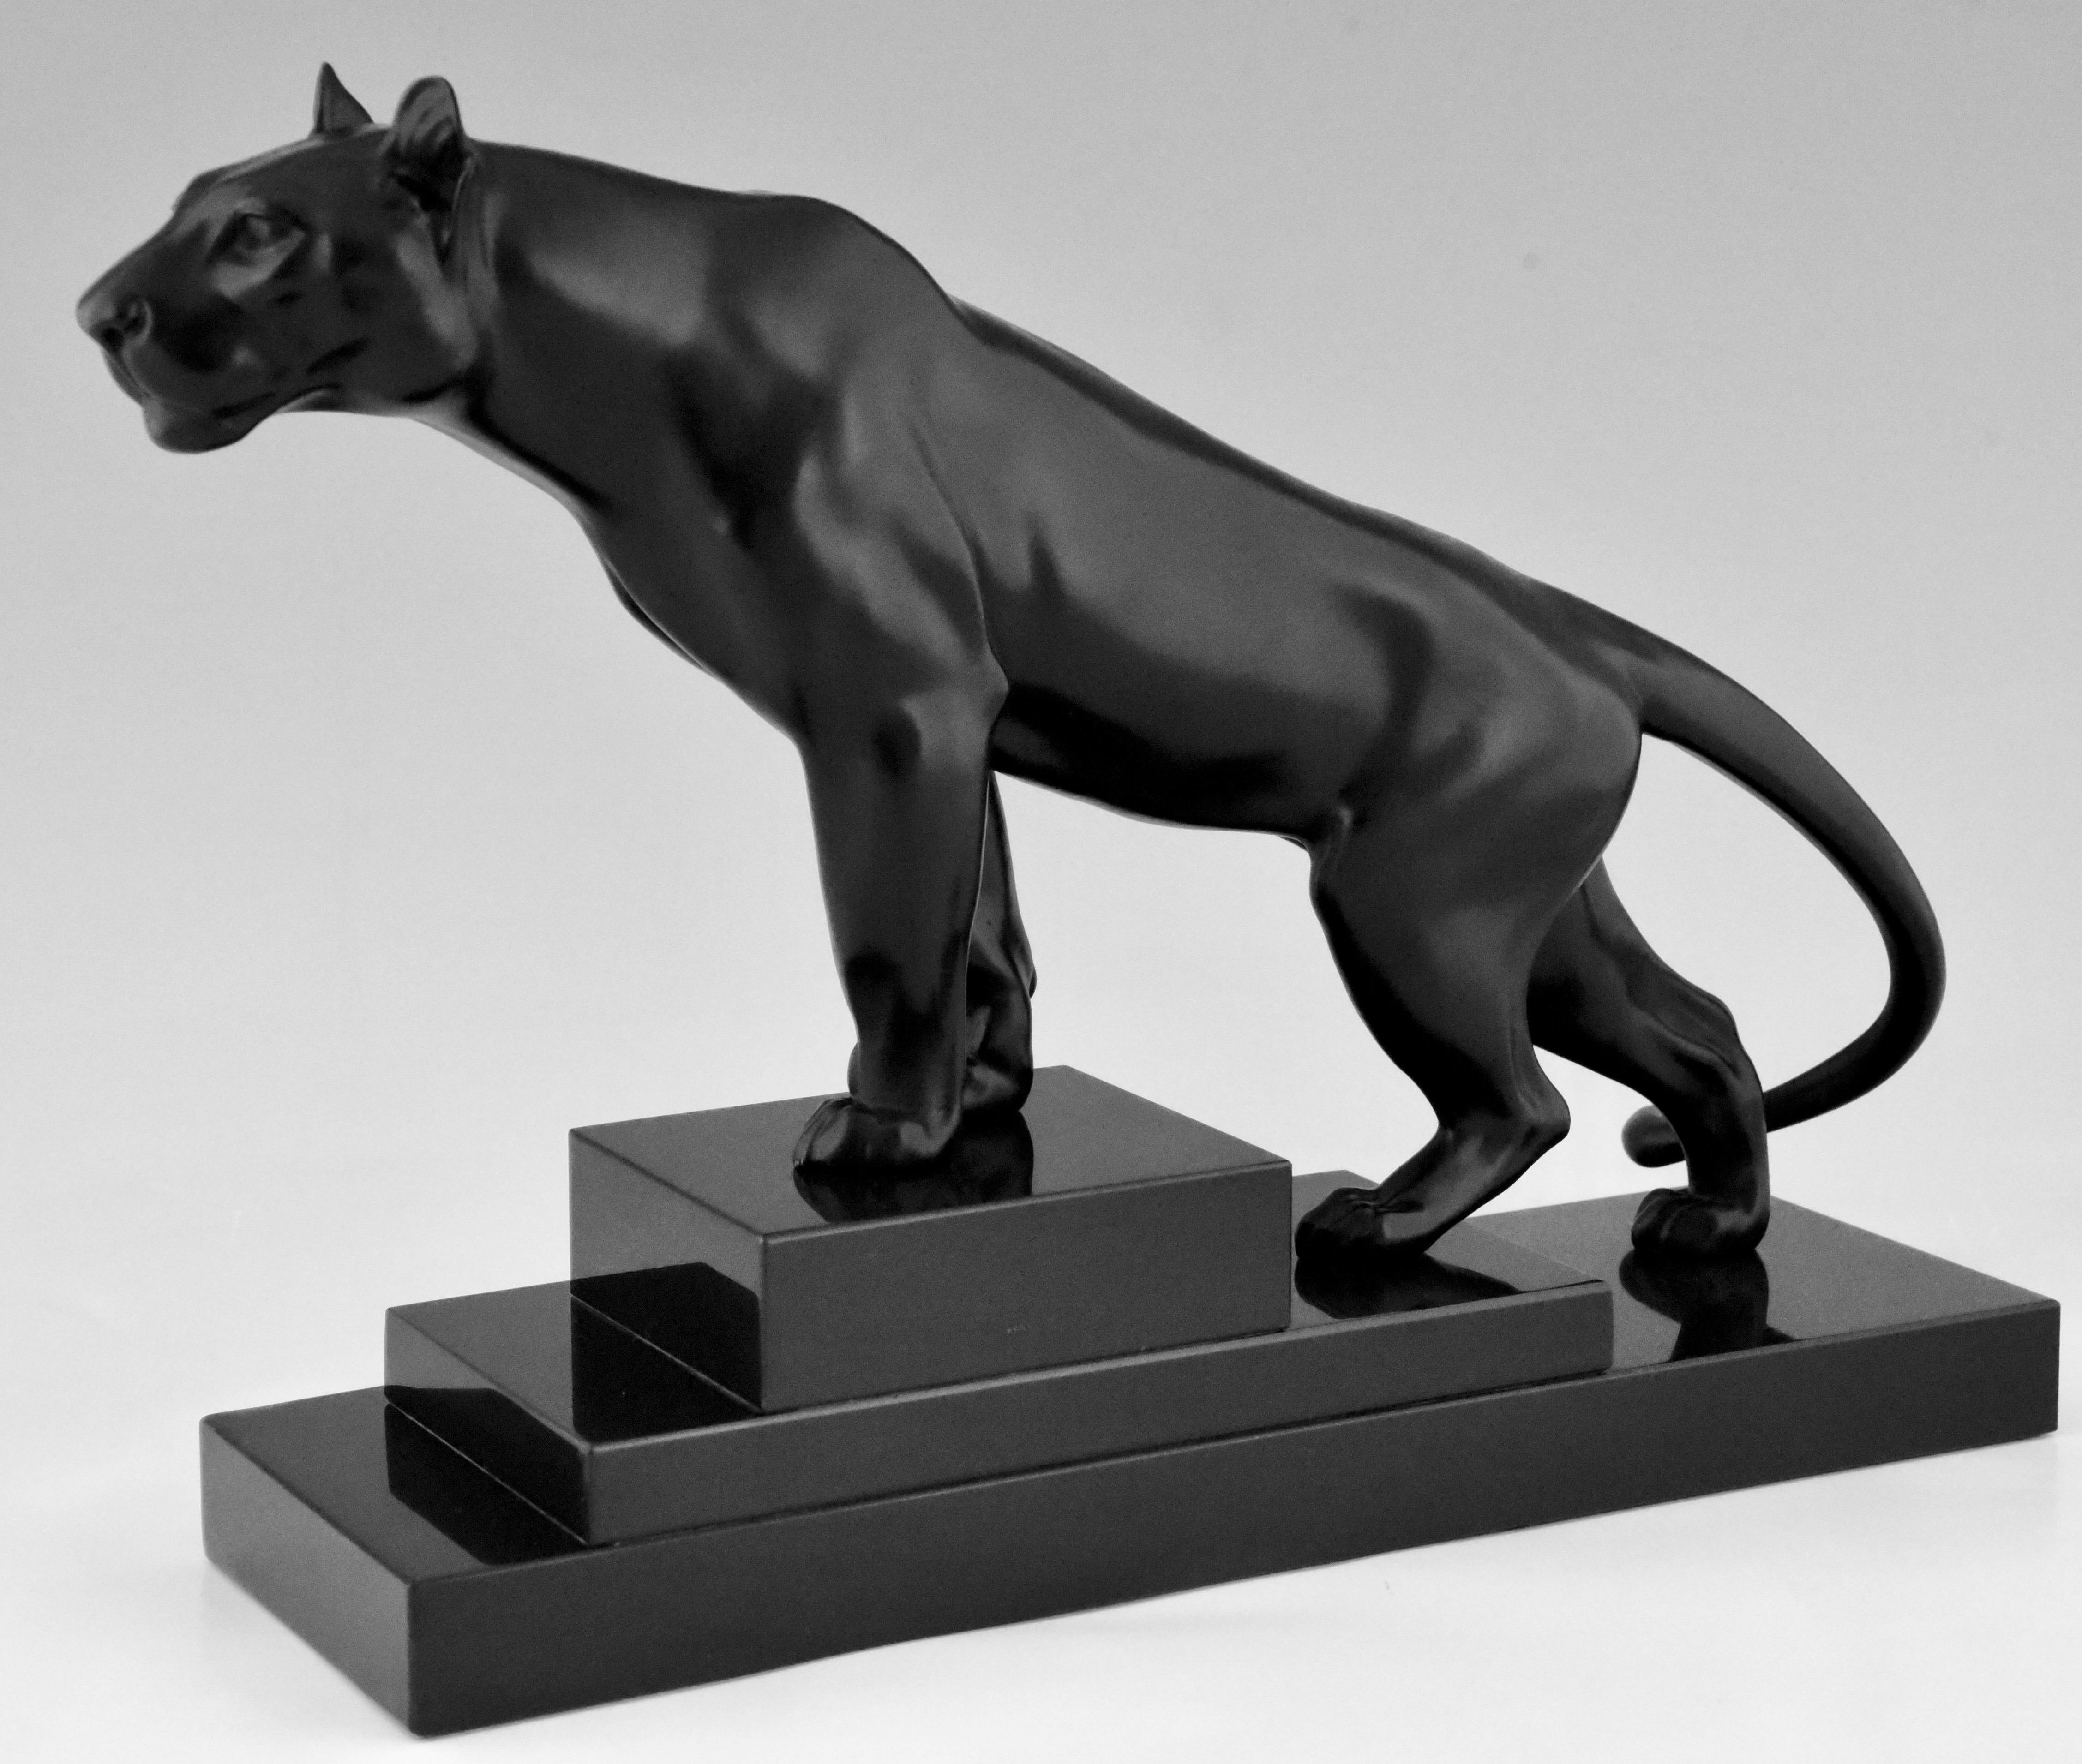 Art Deco Sculpture of a Panther Max Le Verrier, France, 1930 (Patiniert)